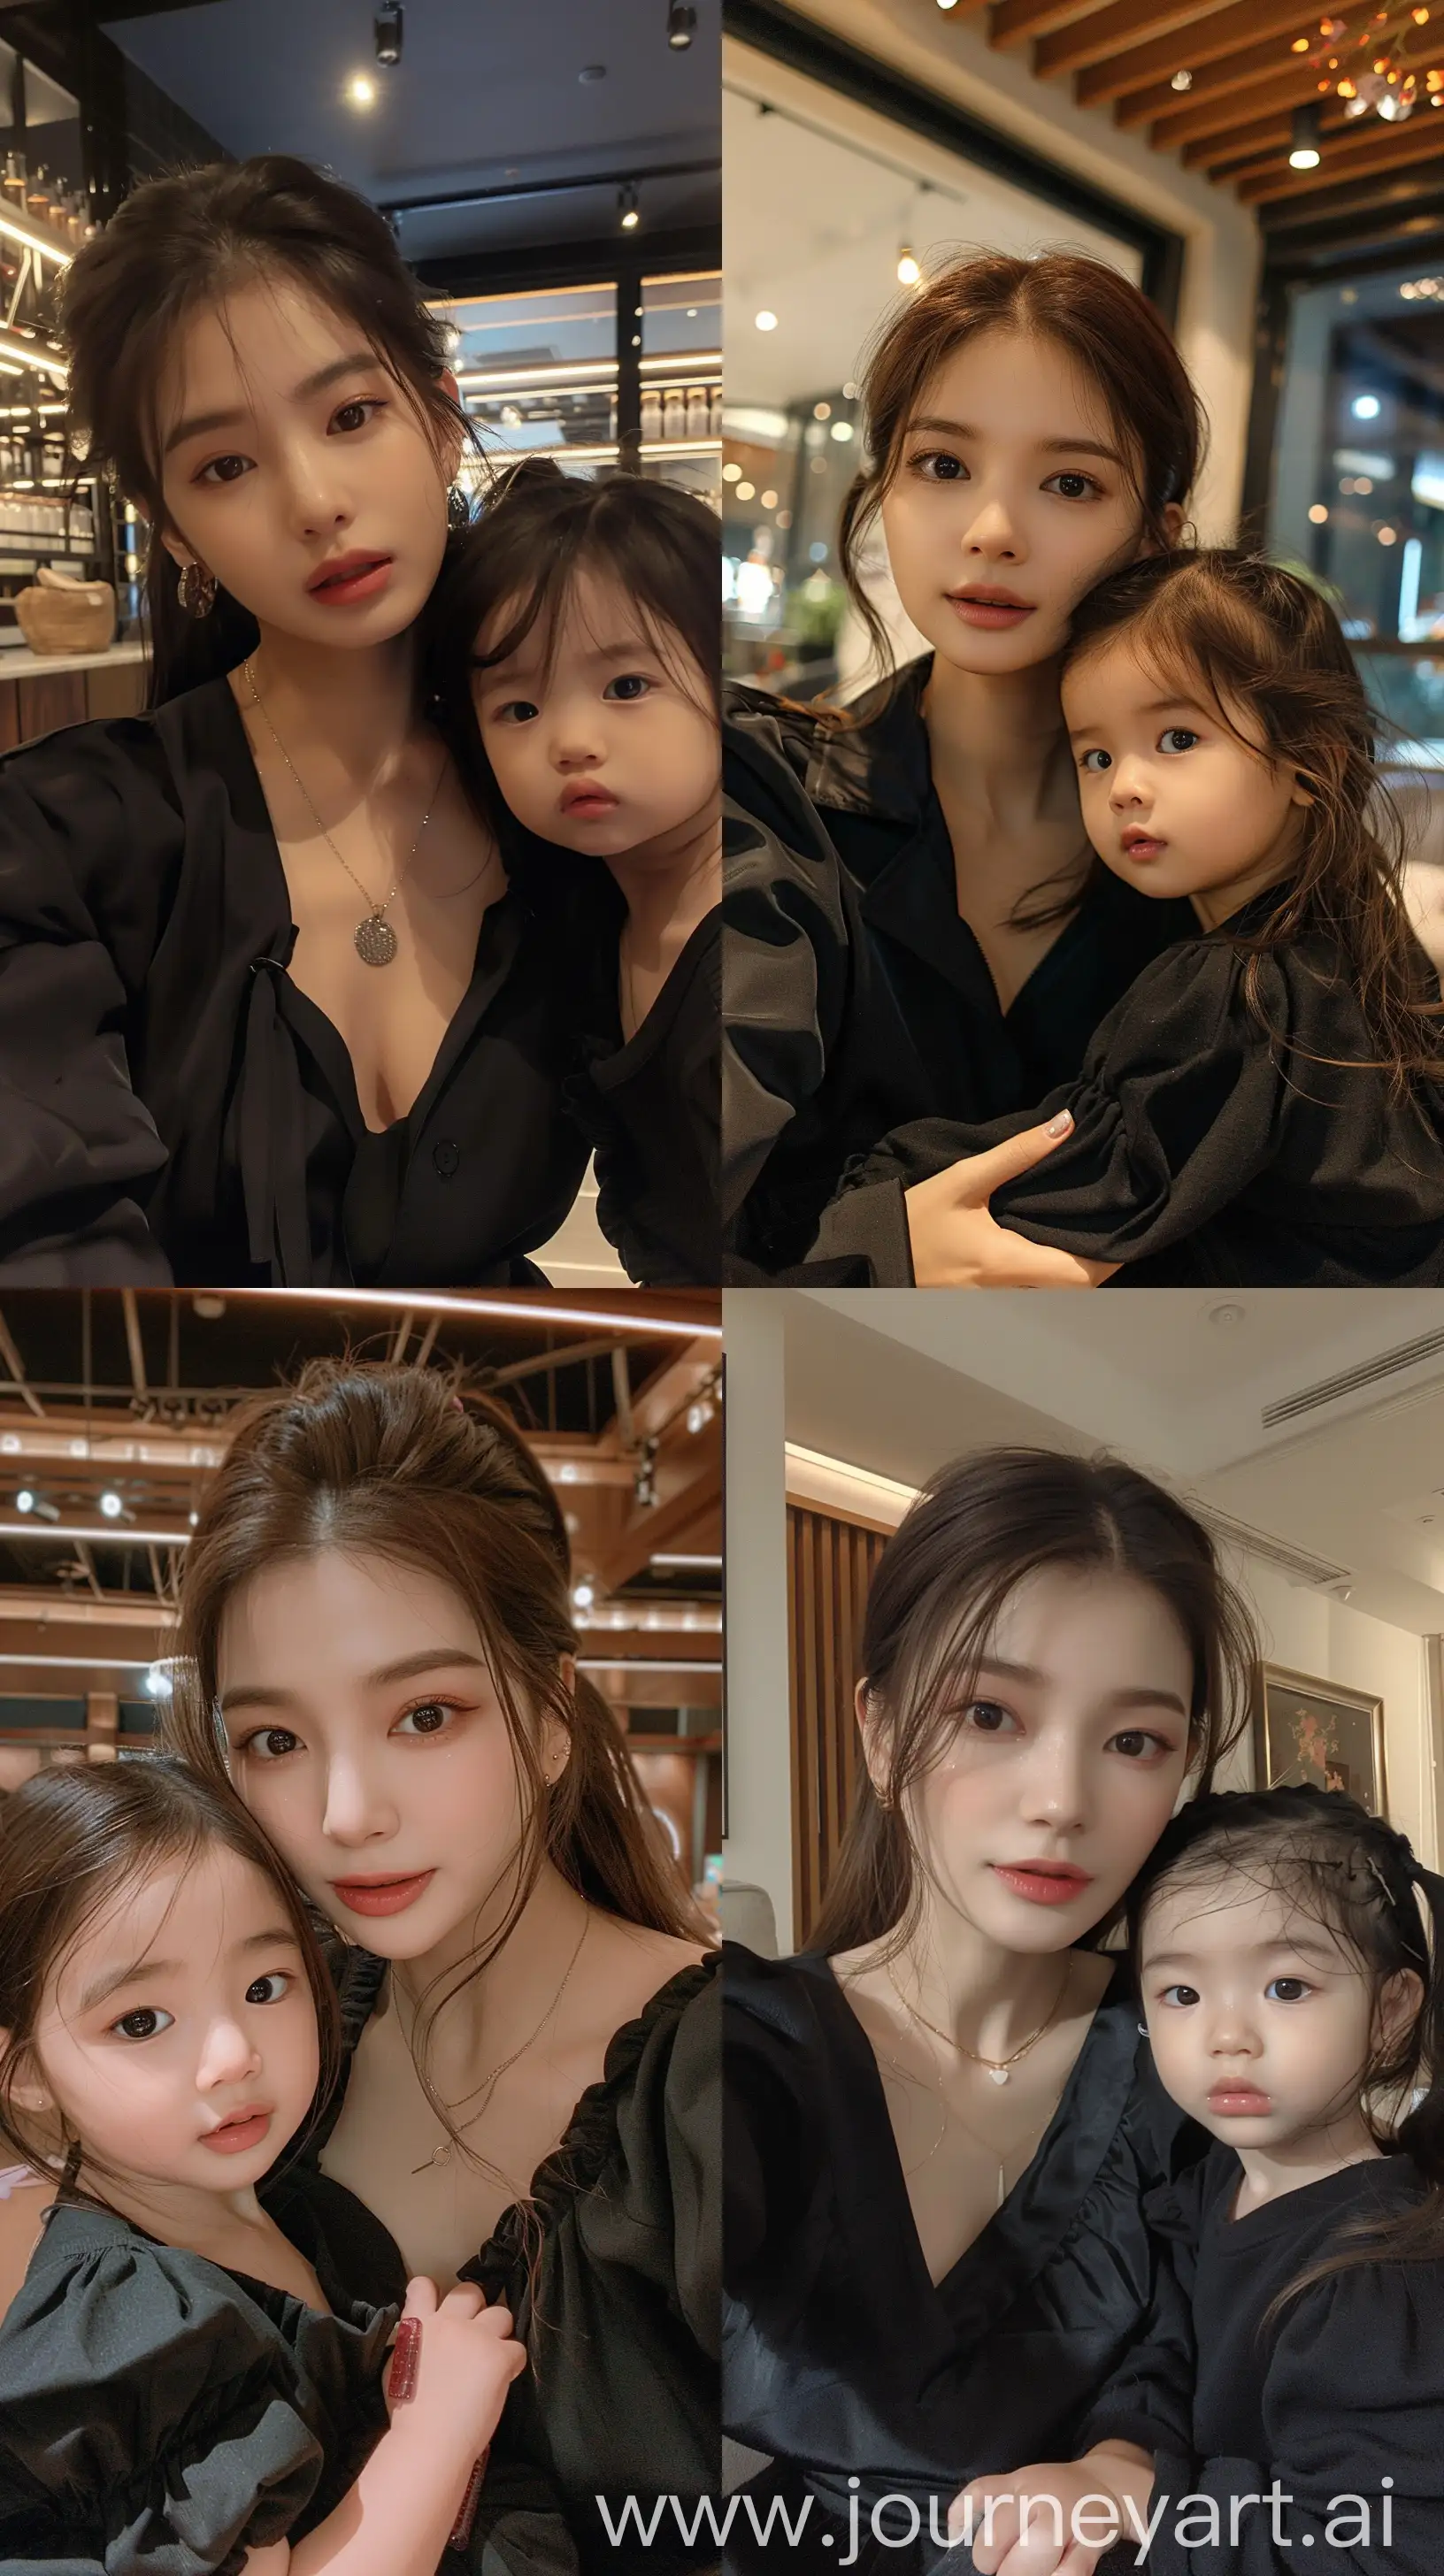 blackpink's jennie selfie with 2 years old  girl, facial feature look a like blackpink's jennie, aestethic selfie, wearing black outfit, night times, aestethic make up,hotly elegant young mom --ar 9:16 --stylize 250